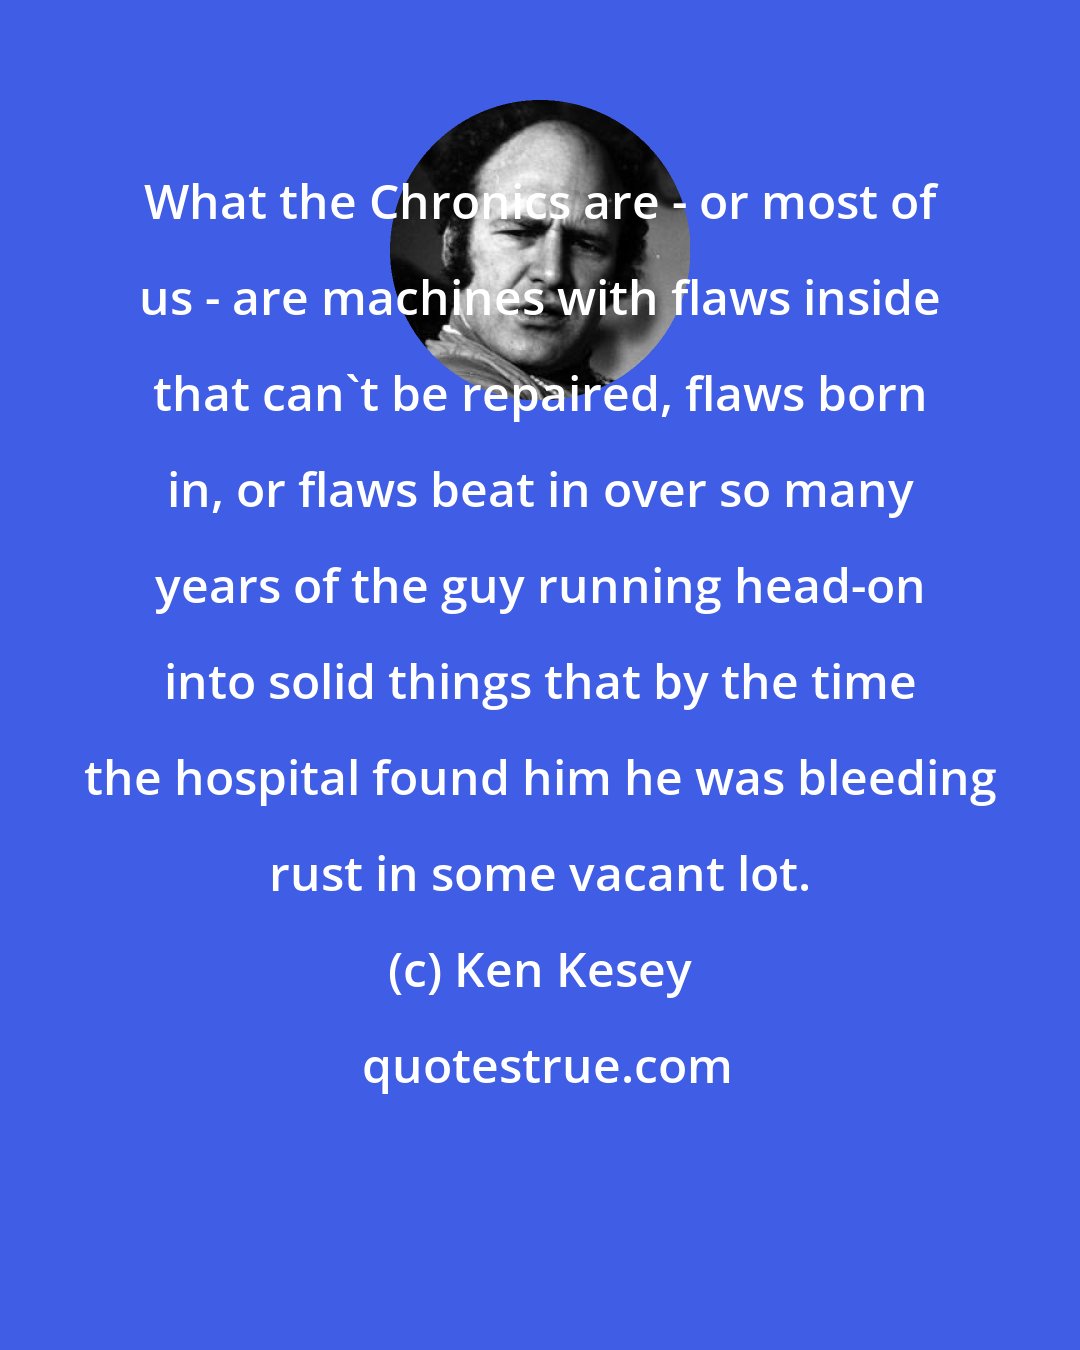 Ken Kesey: What the Chronics are - or most of us - are machines with flaws inside that can't be repaired, flaws born in, or flaws beat in over so many years of the guy running head-on into solid things that by the time the hospital found him he was bleeding rust in some vacant lot.